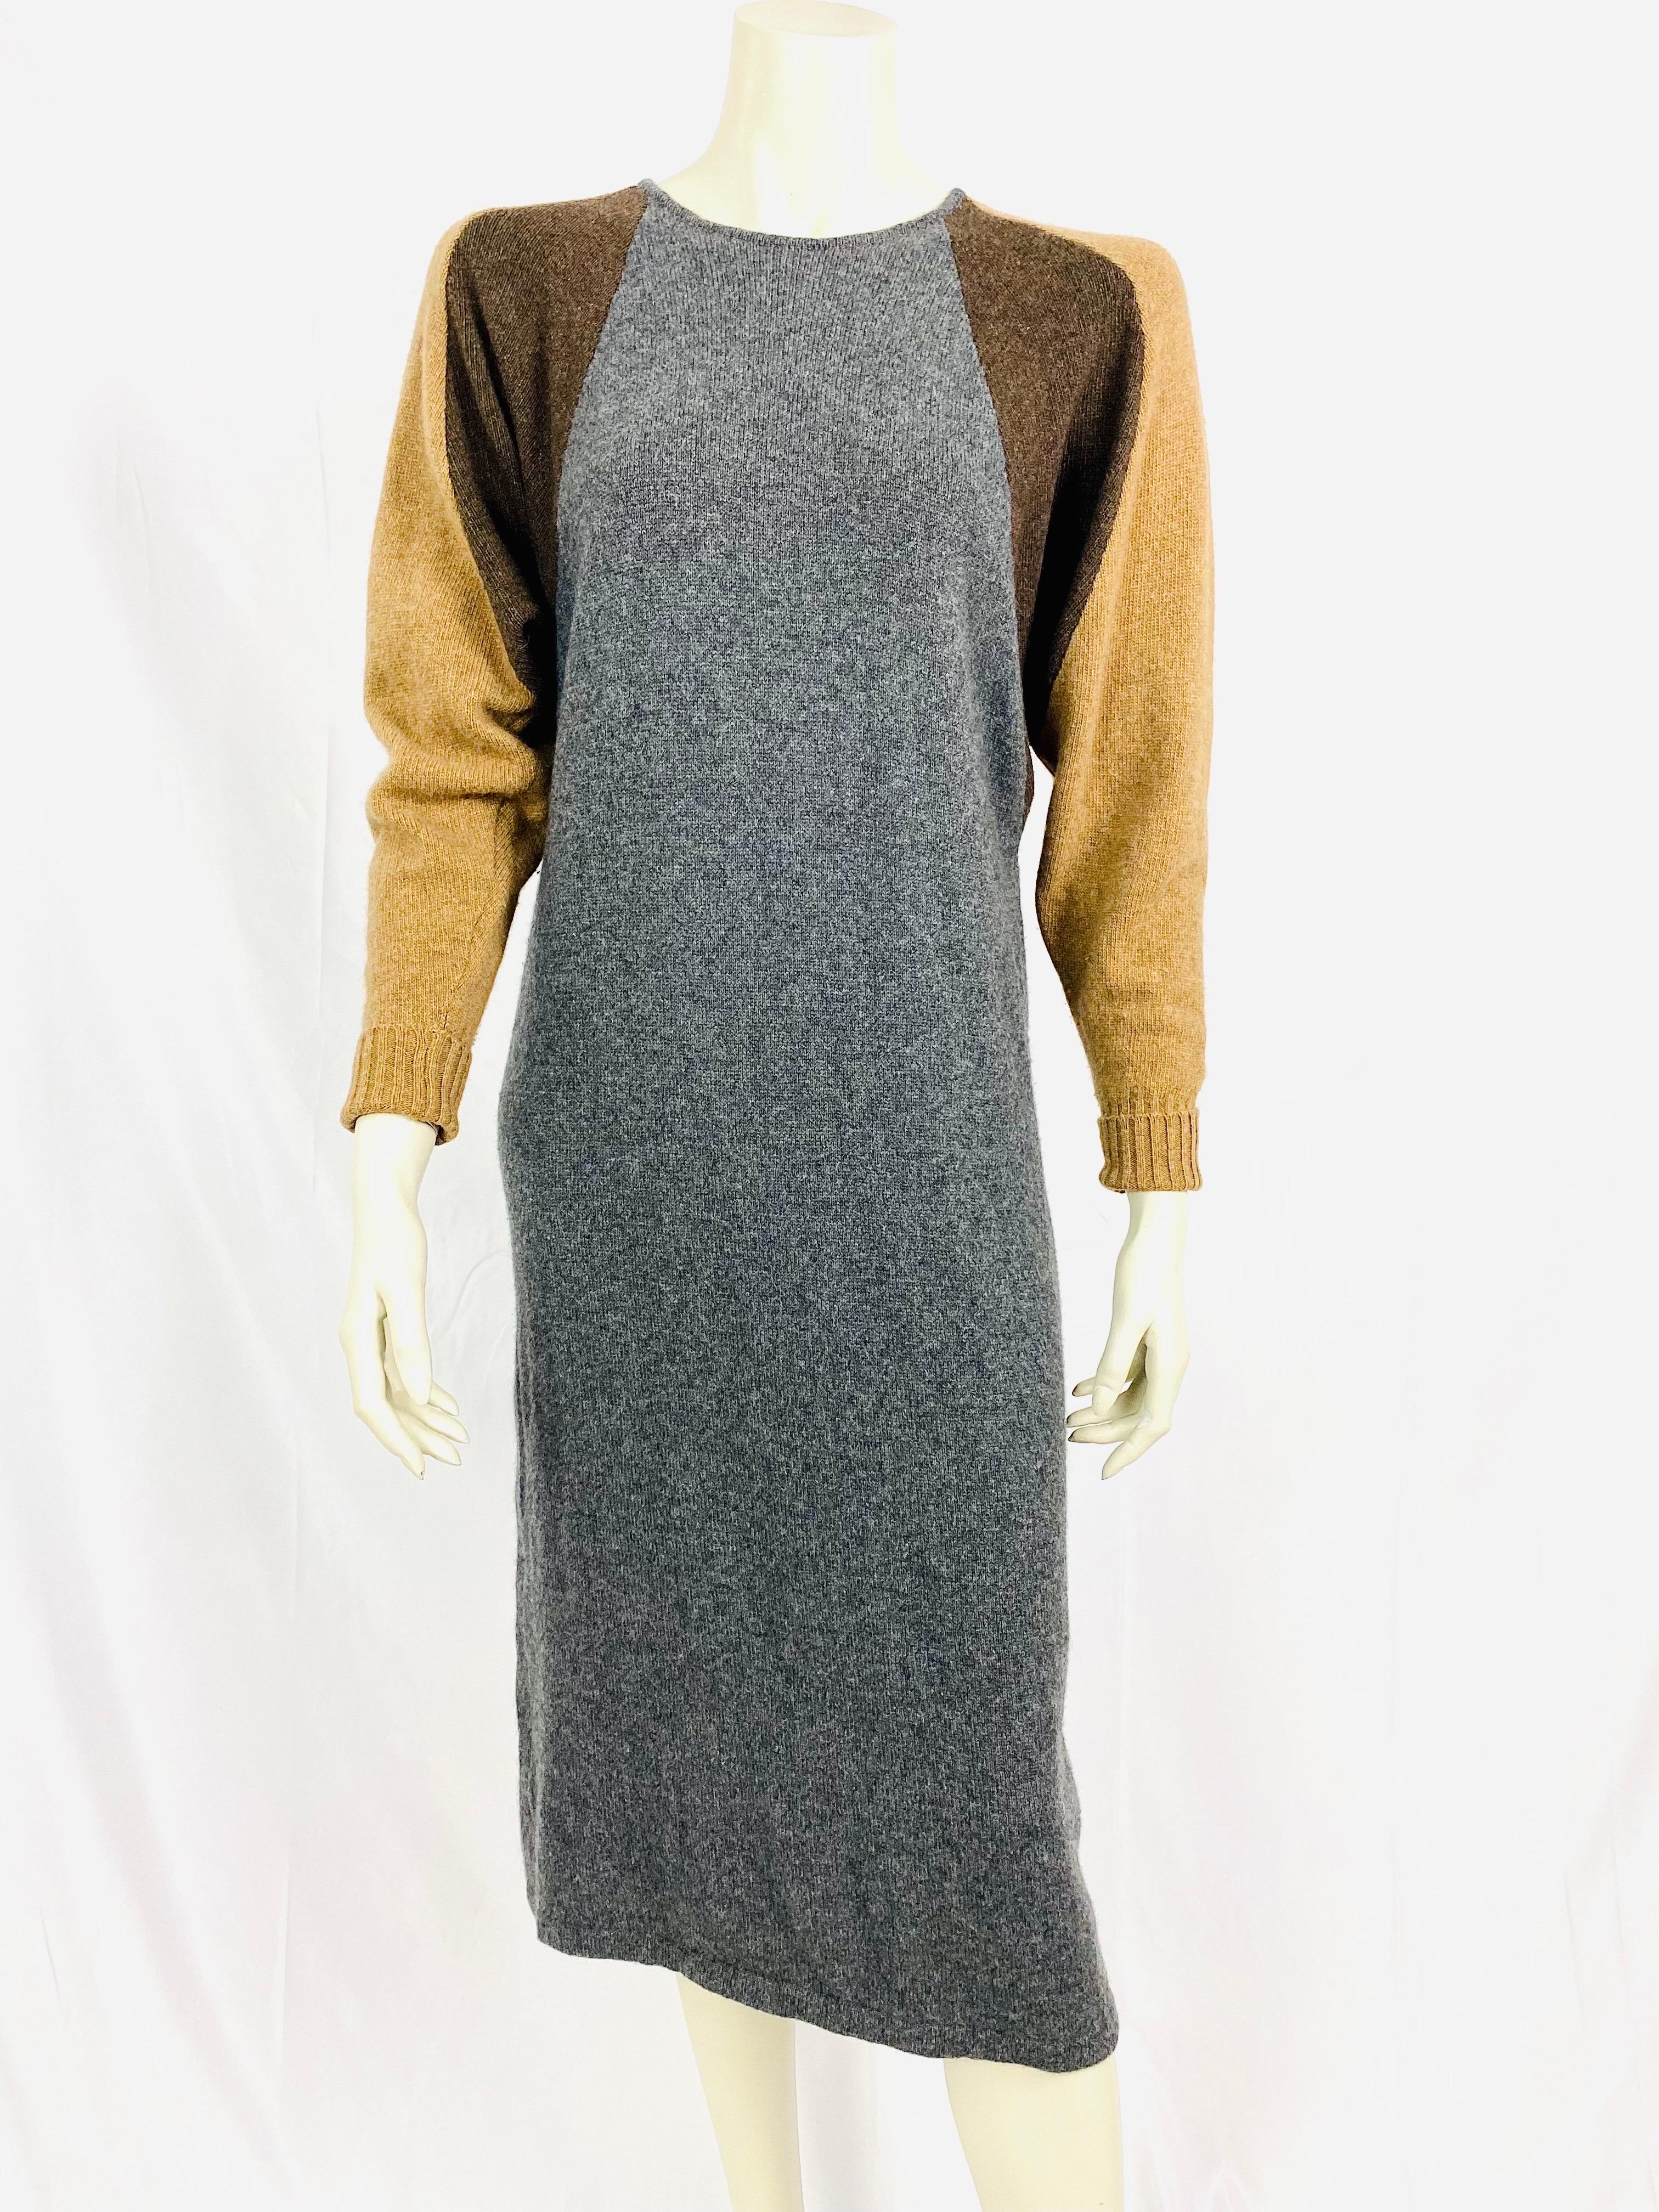 Vintage Issey Miyake cashmere sweater dress from the 1980s, batwing, raglan sleeves with a round neck.
Tricolor, grey, brown and camel on the arms.
Missing size label, refer to measurements
estimated size 38/40 FR
Chest width 49cm
Length